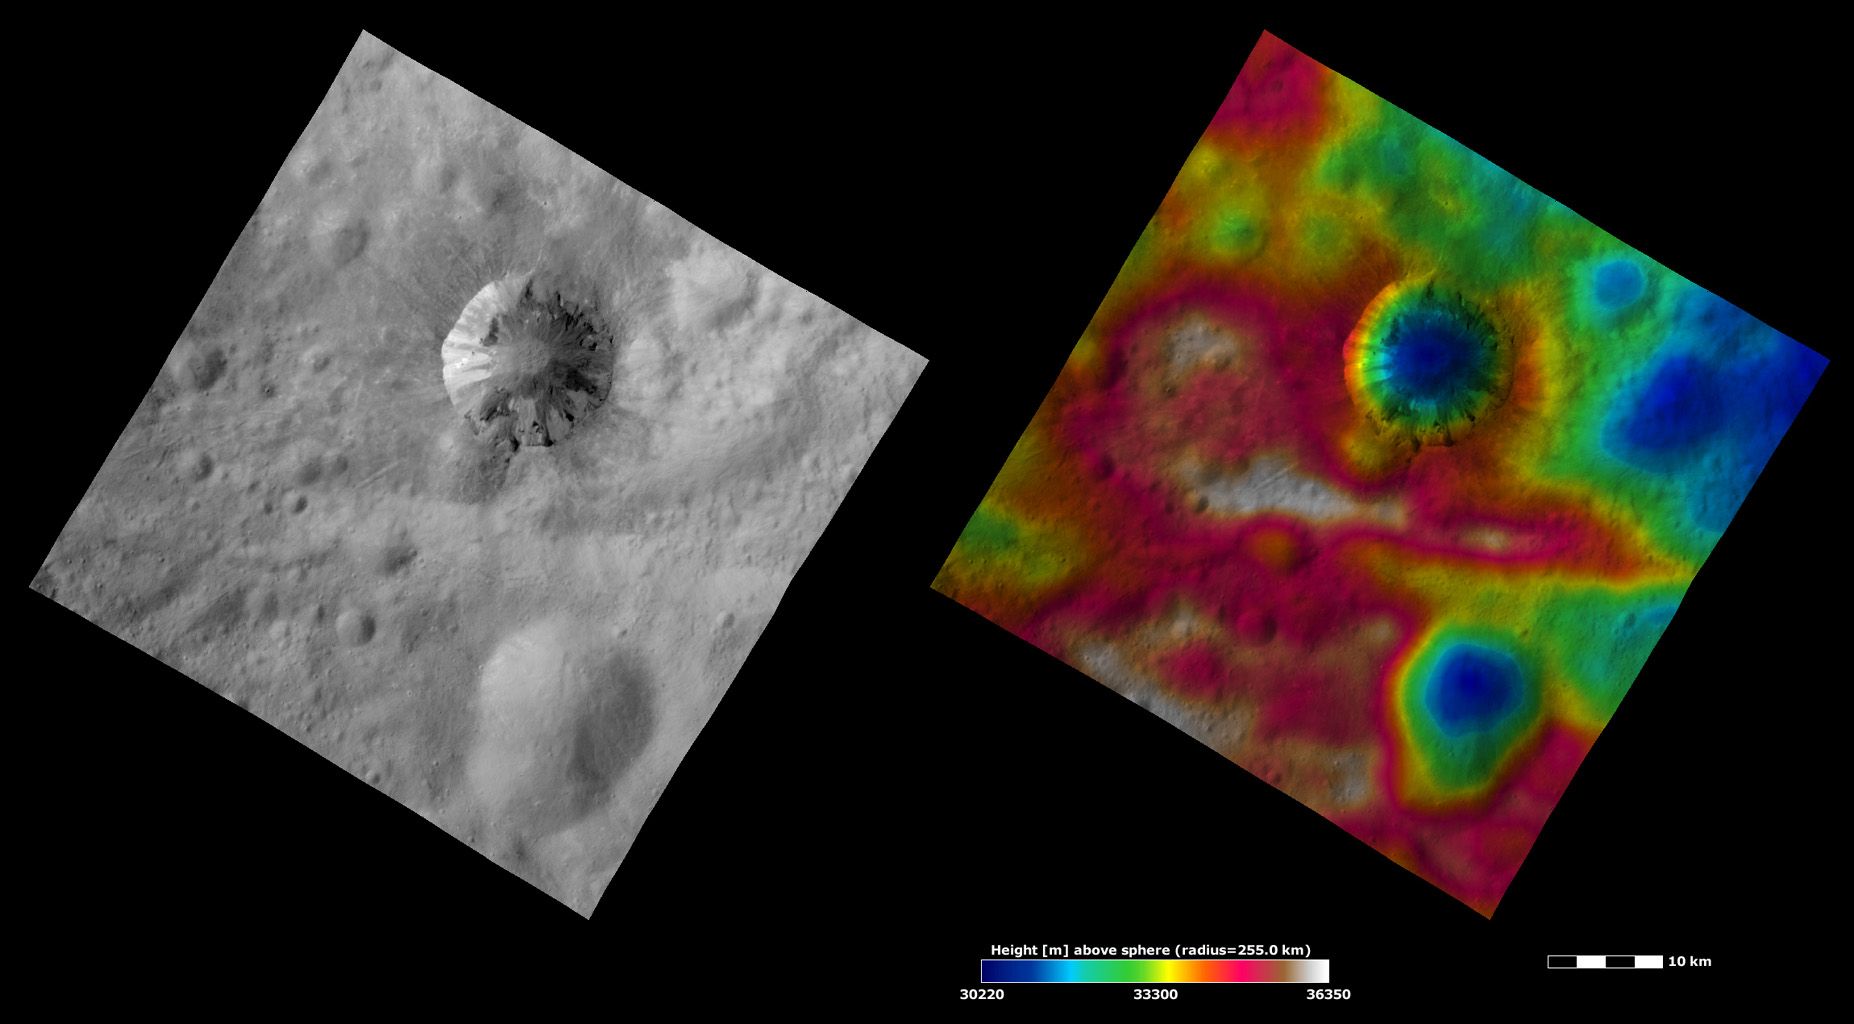 Apparent Brightness and Topography Images of Cornelia Crater